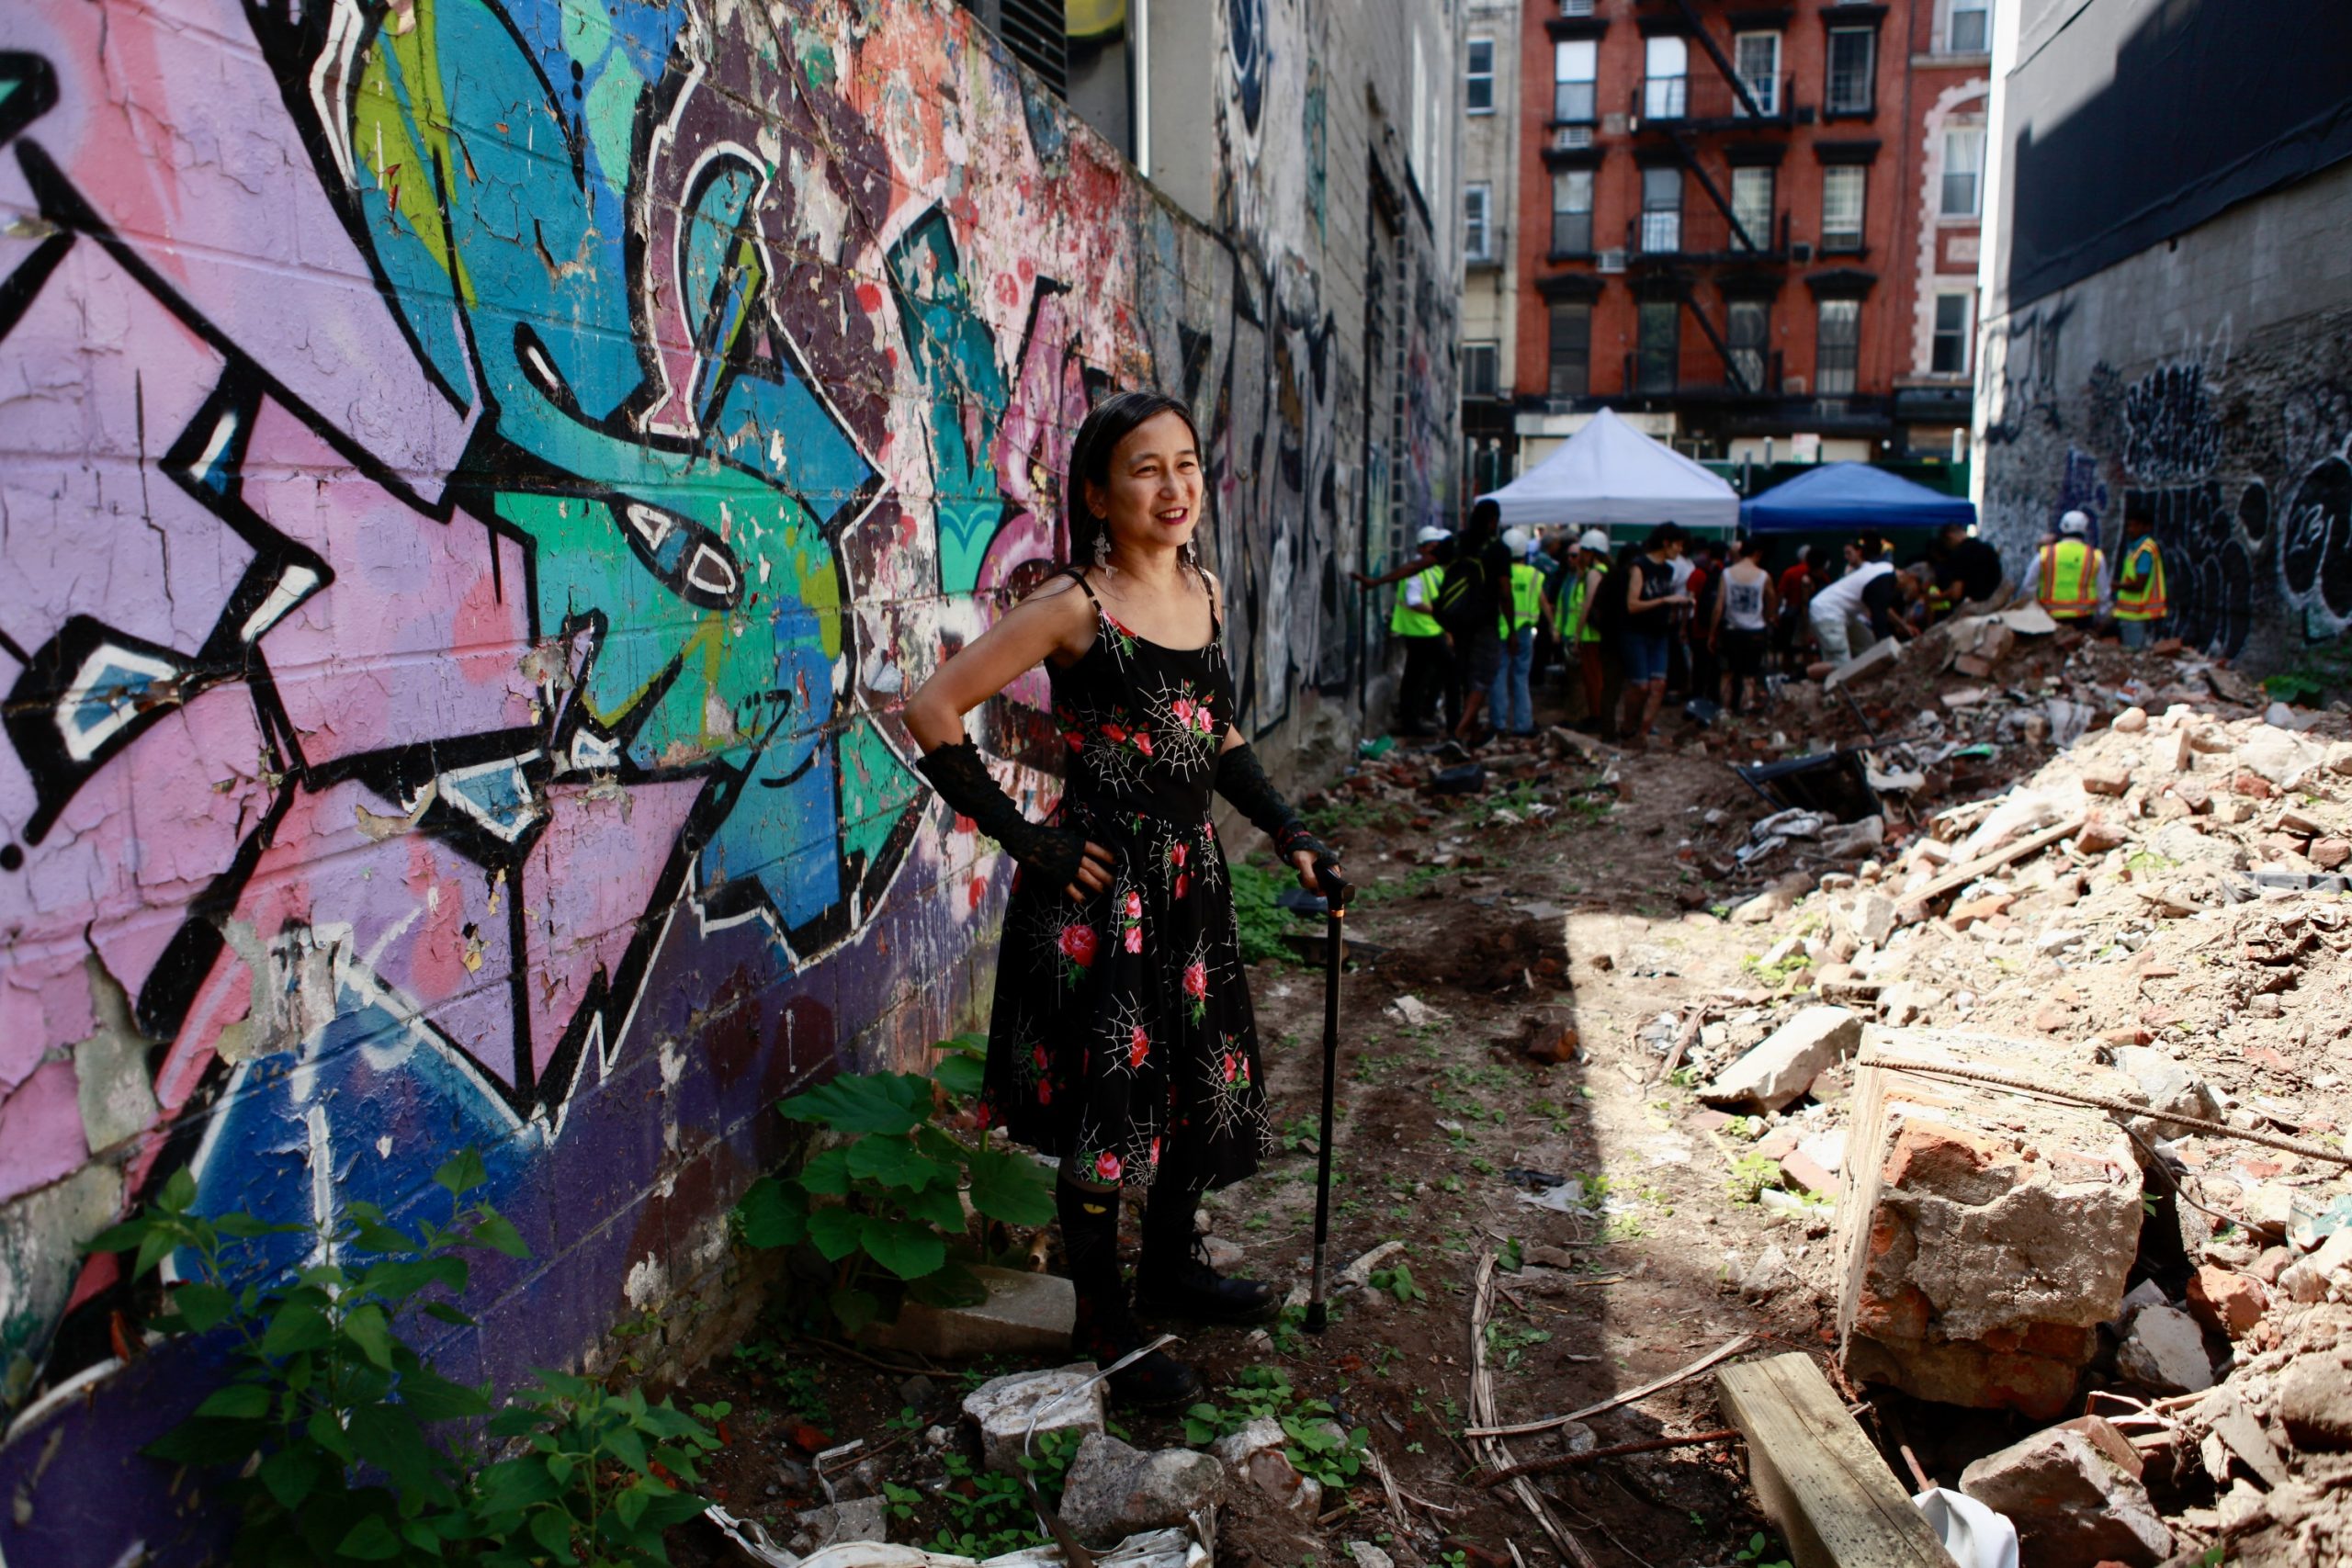 Victoria Law stands in the rubble of the former ABC No Rio with construction team and ABC community in the background. Law is the founder of Books through Bars at ABC No Rio.